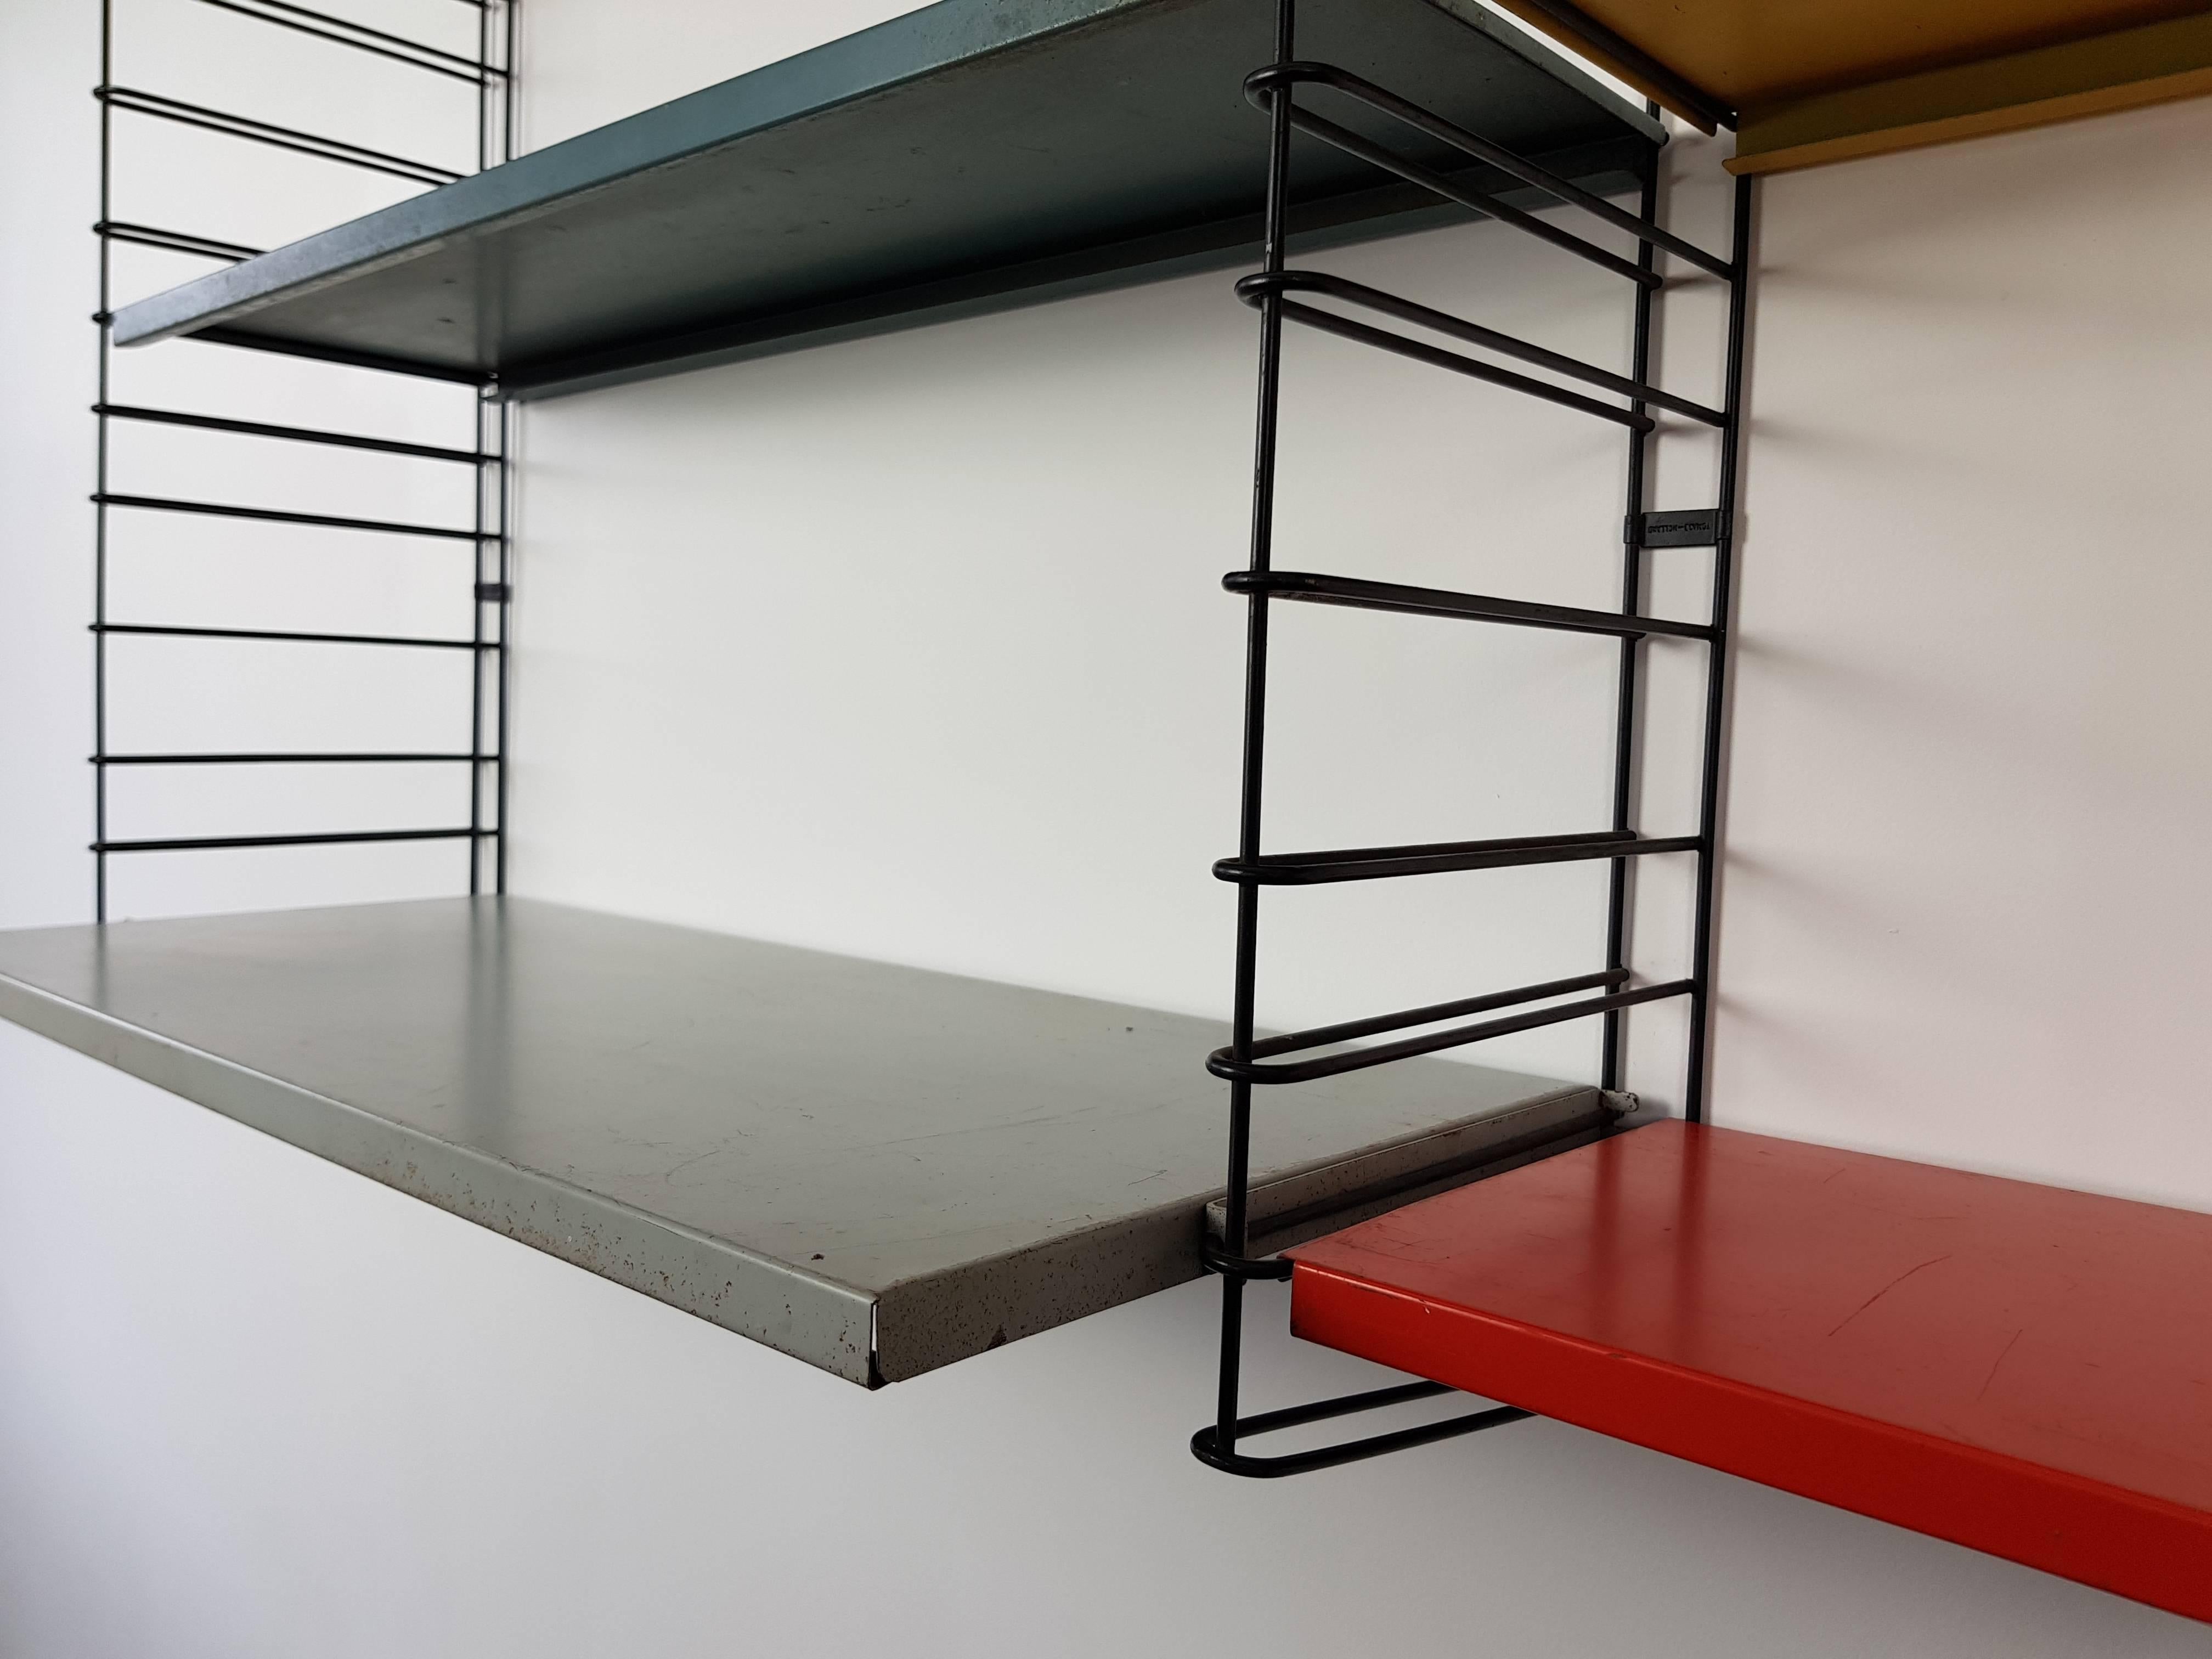 20th Century Dutch Tomado Hanging Wall Shelves, Designed in the 1950s by A. Dekker